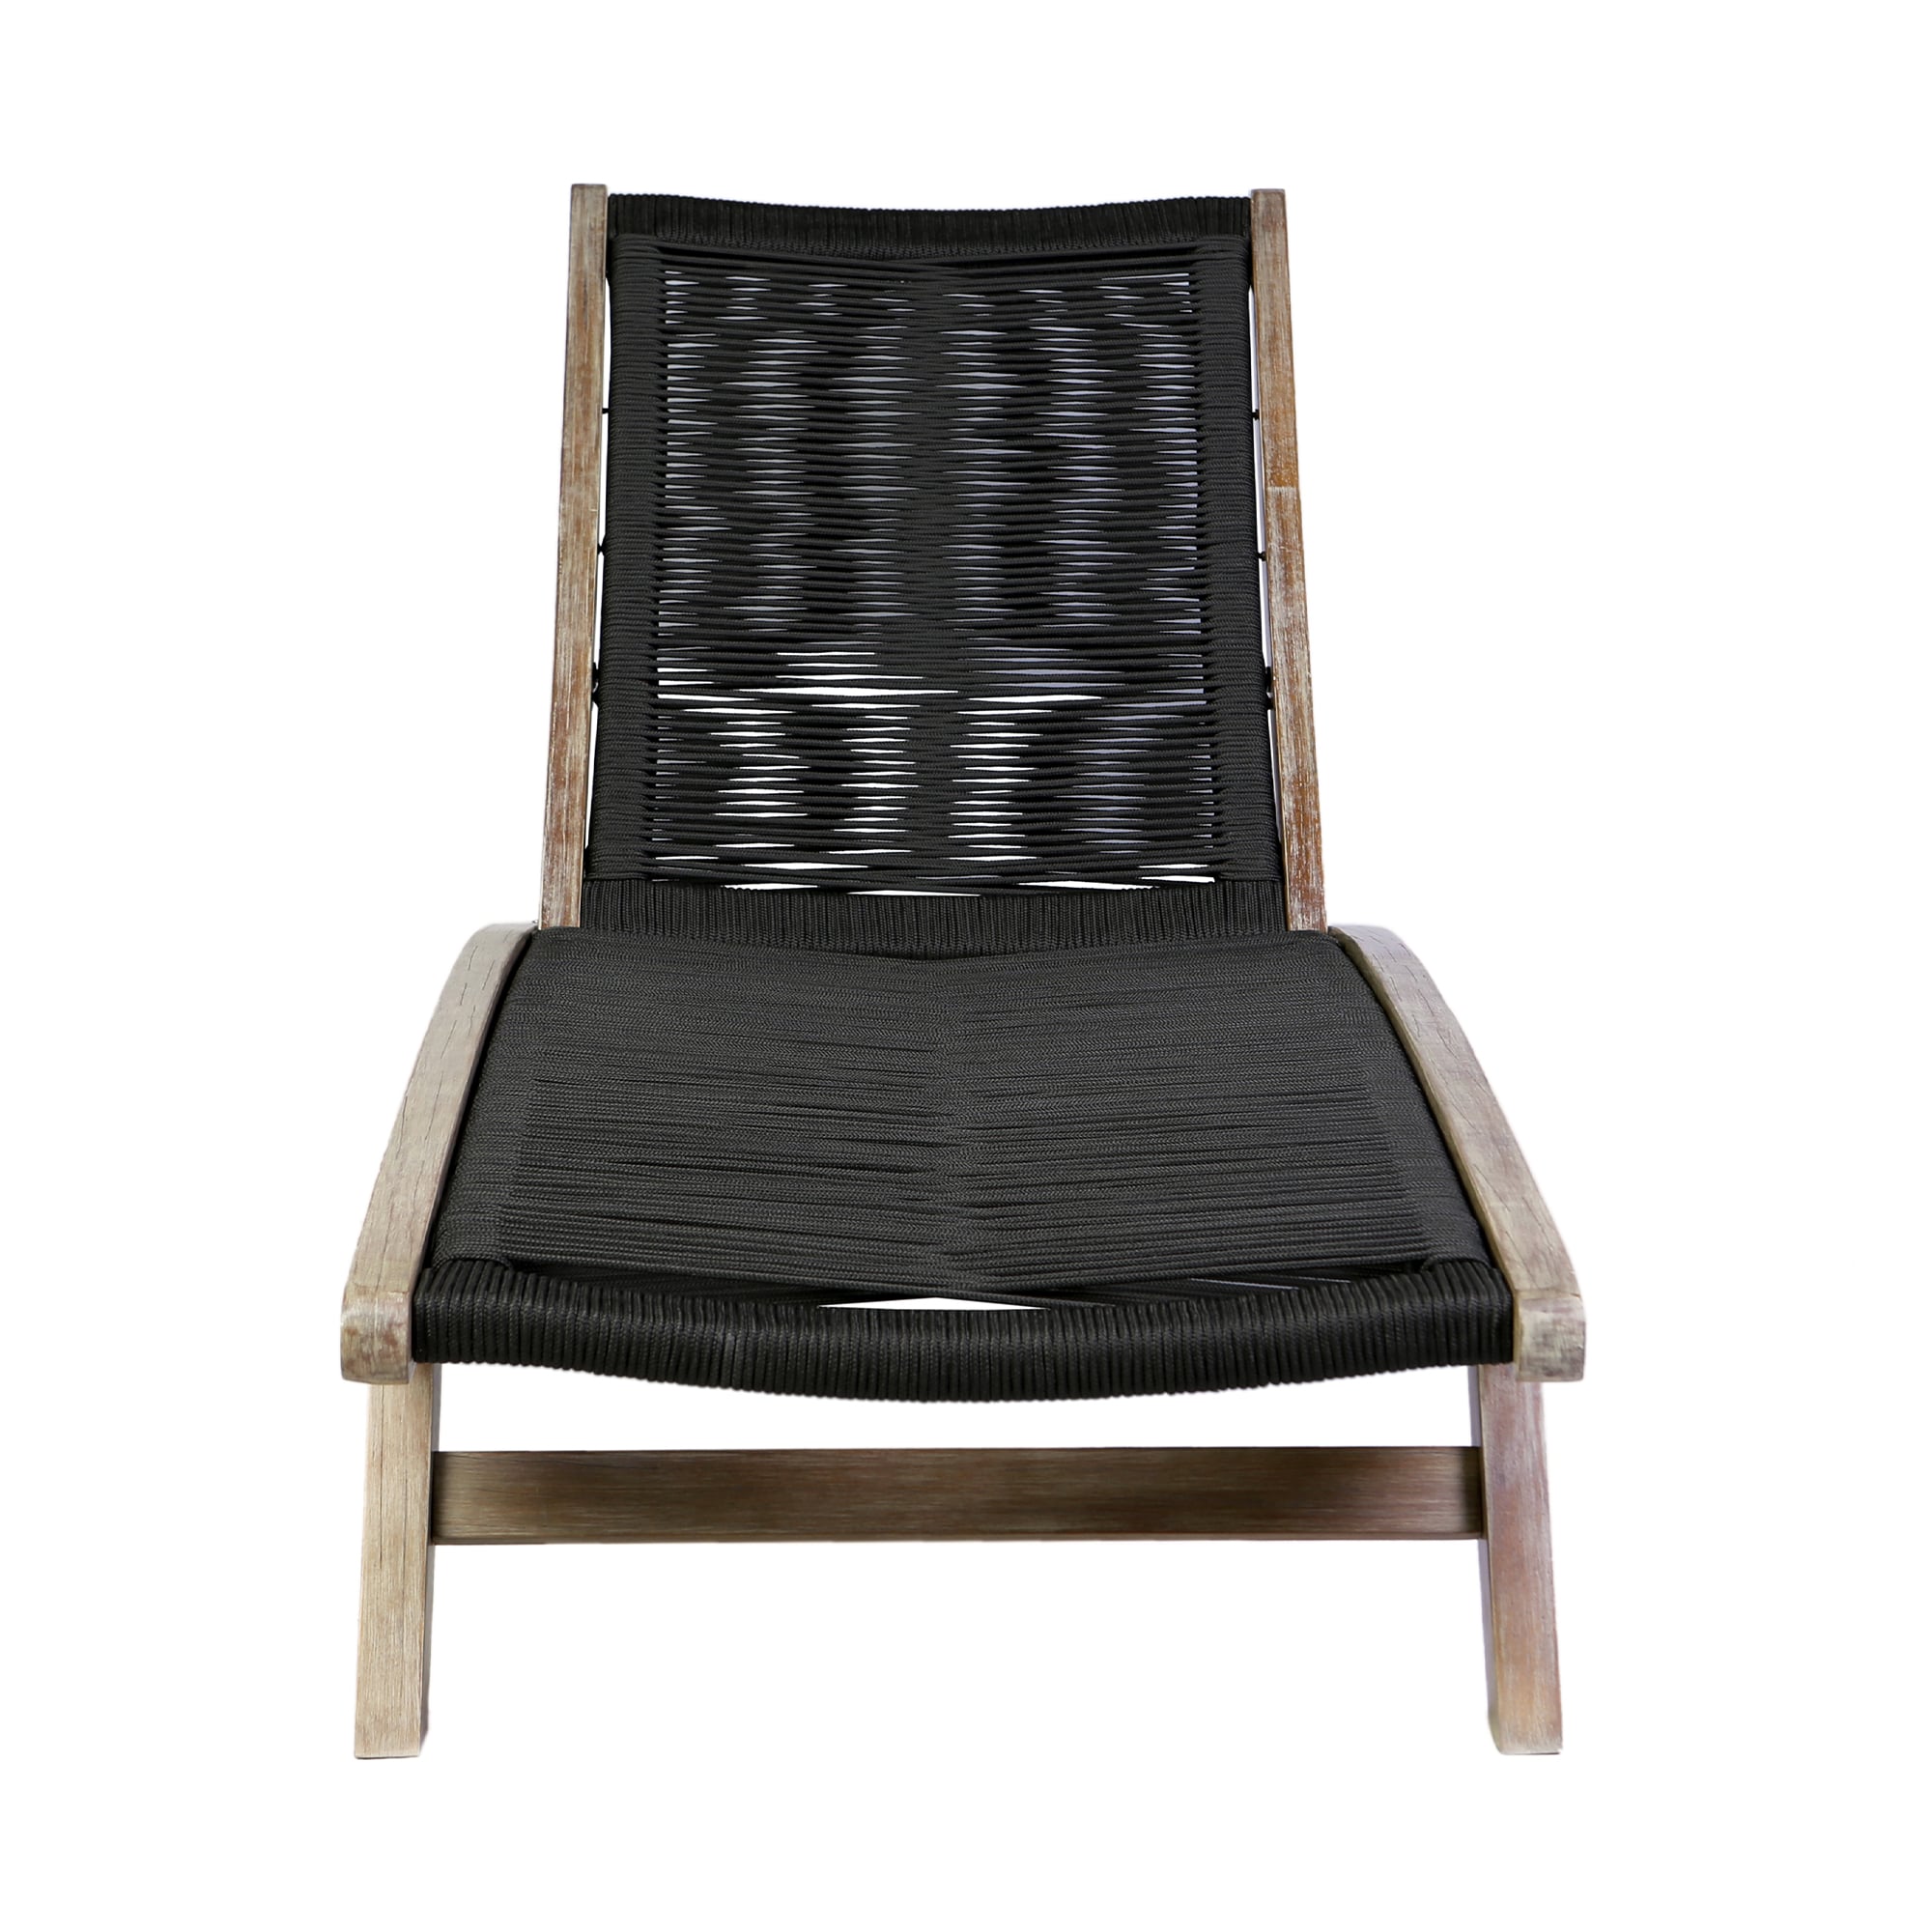 Chateau Outdoor Patio Adjustable Chaise Lounge Chair in Eucalyptus Wood and Charcoal Rope